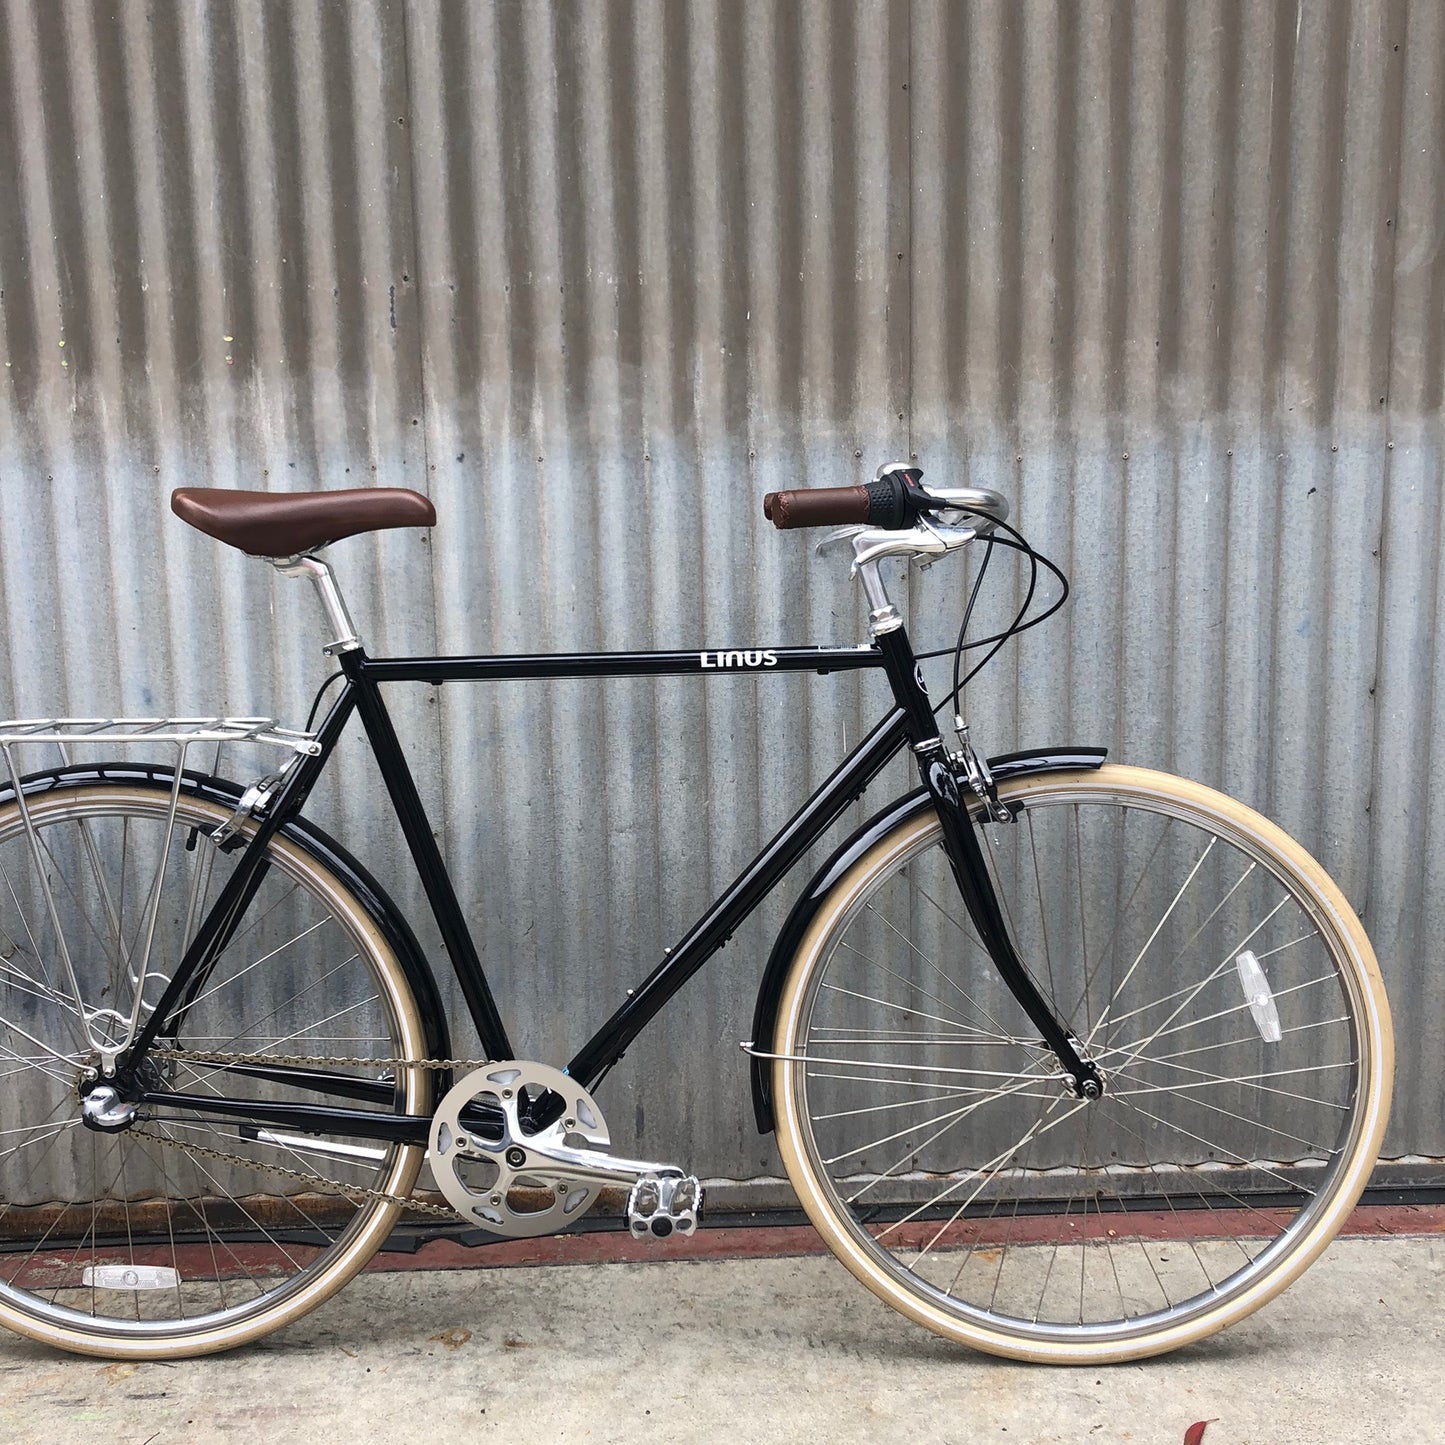 Linus Roadster 3-speed Large - Discount for Scratches in Paint - Was used on commercial